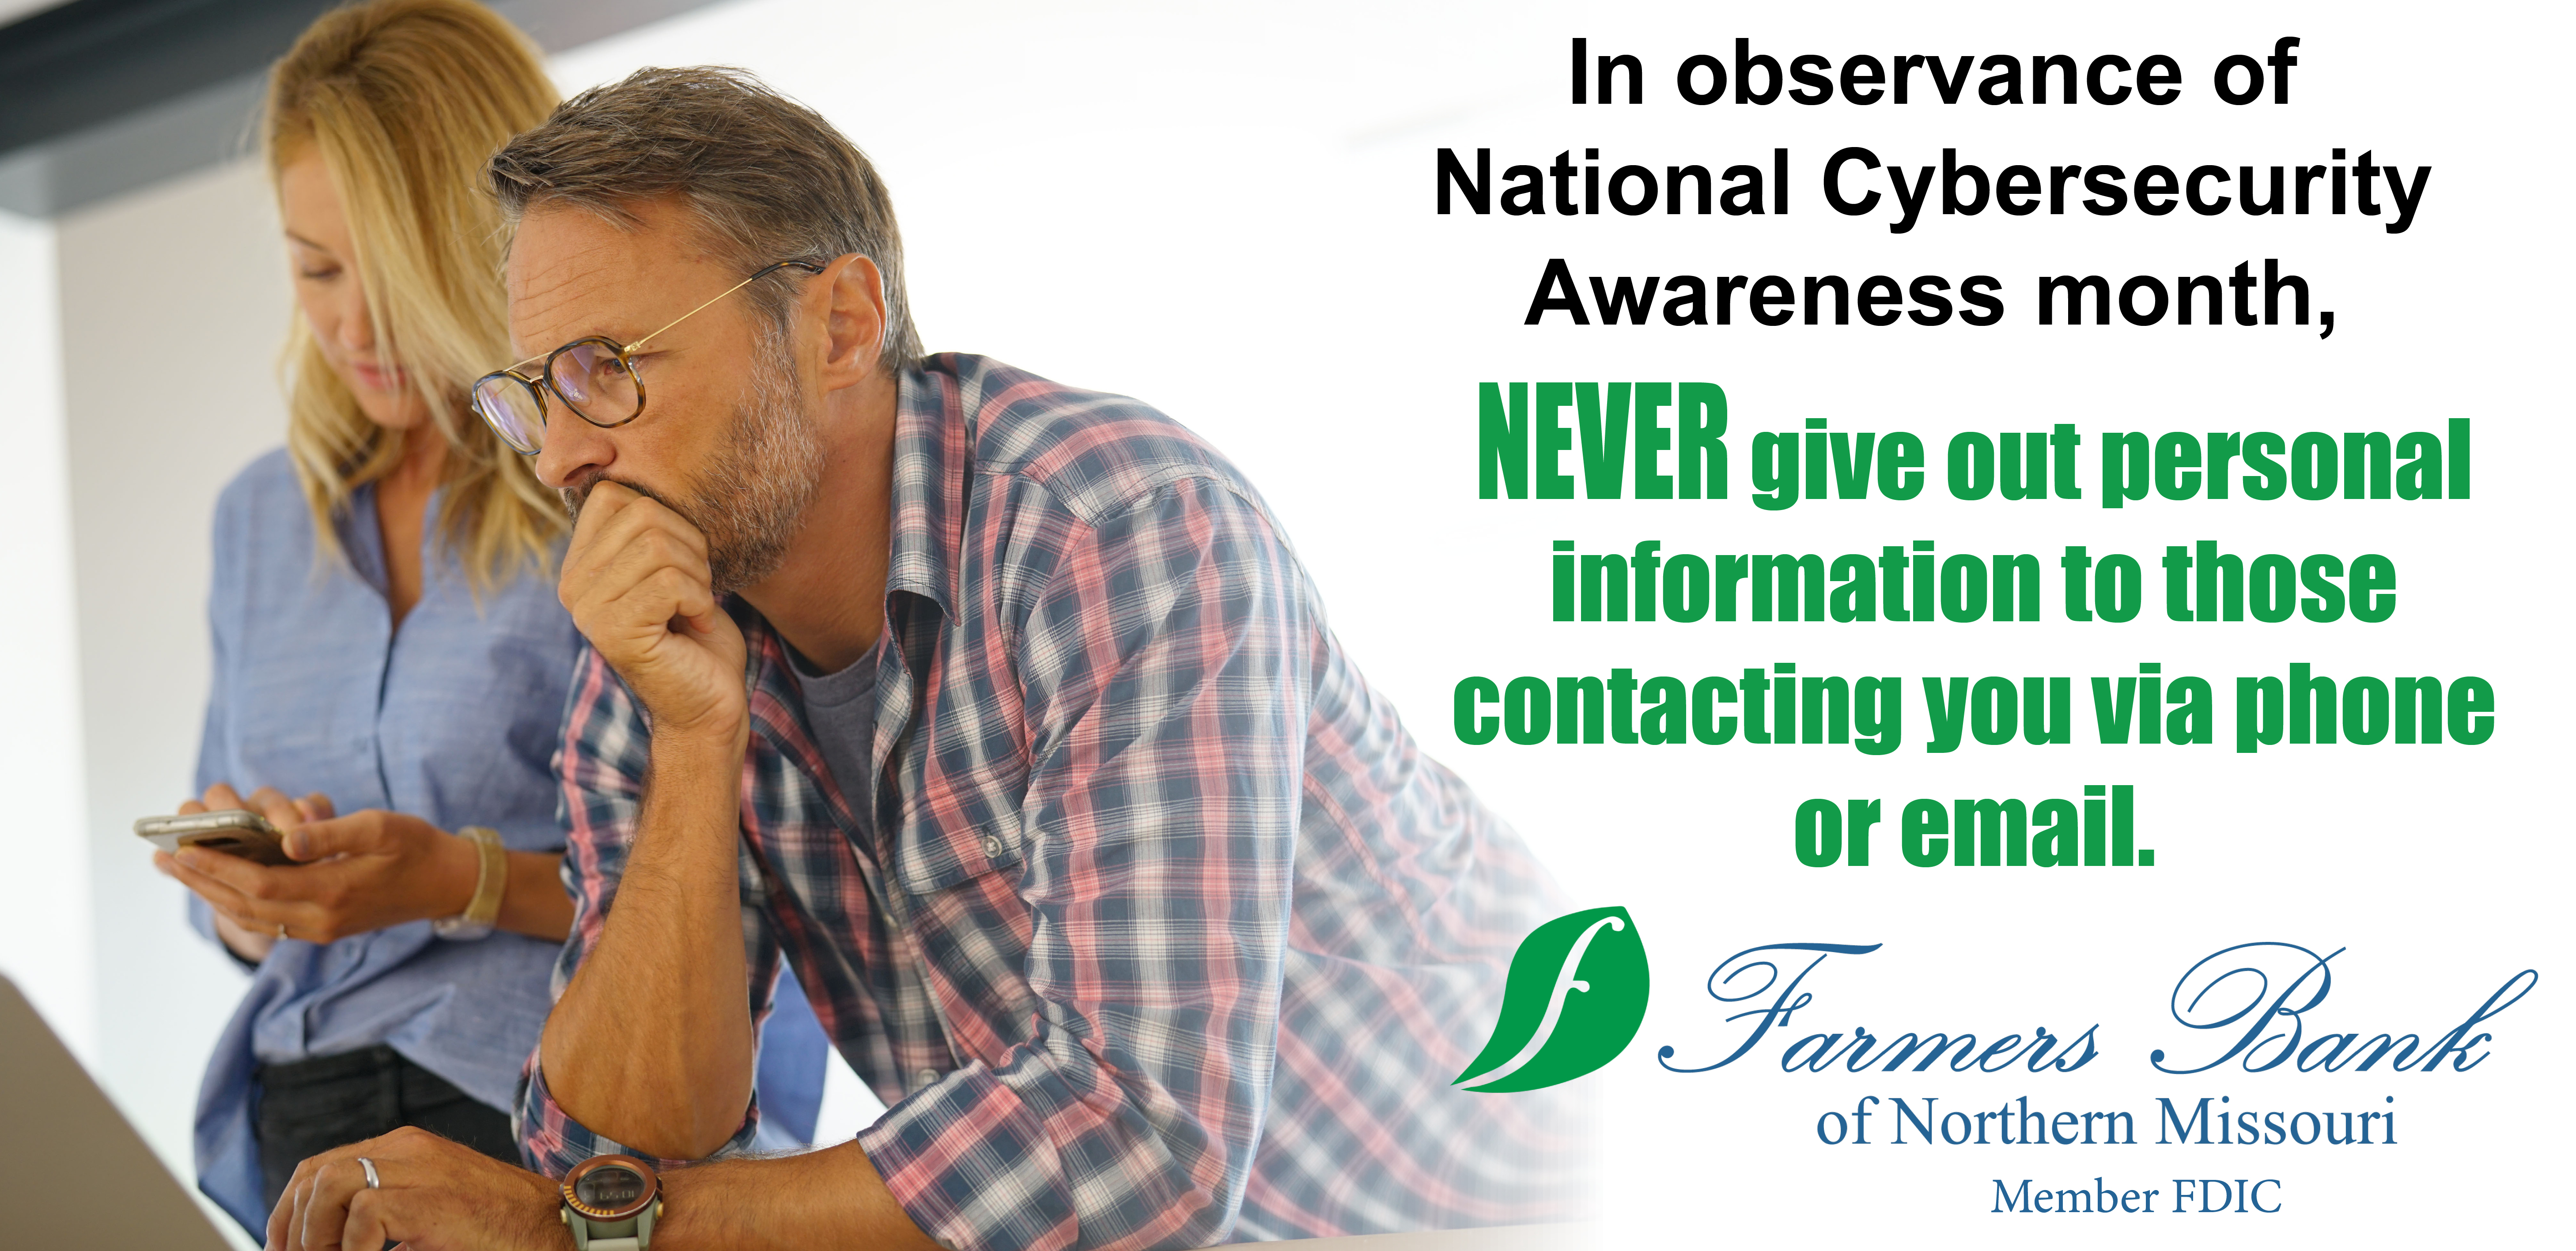 In observance of National Cybersecurity Awareness month, NEVER give out personal information to those contacting you via phone or email.